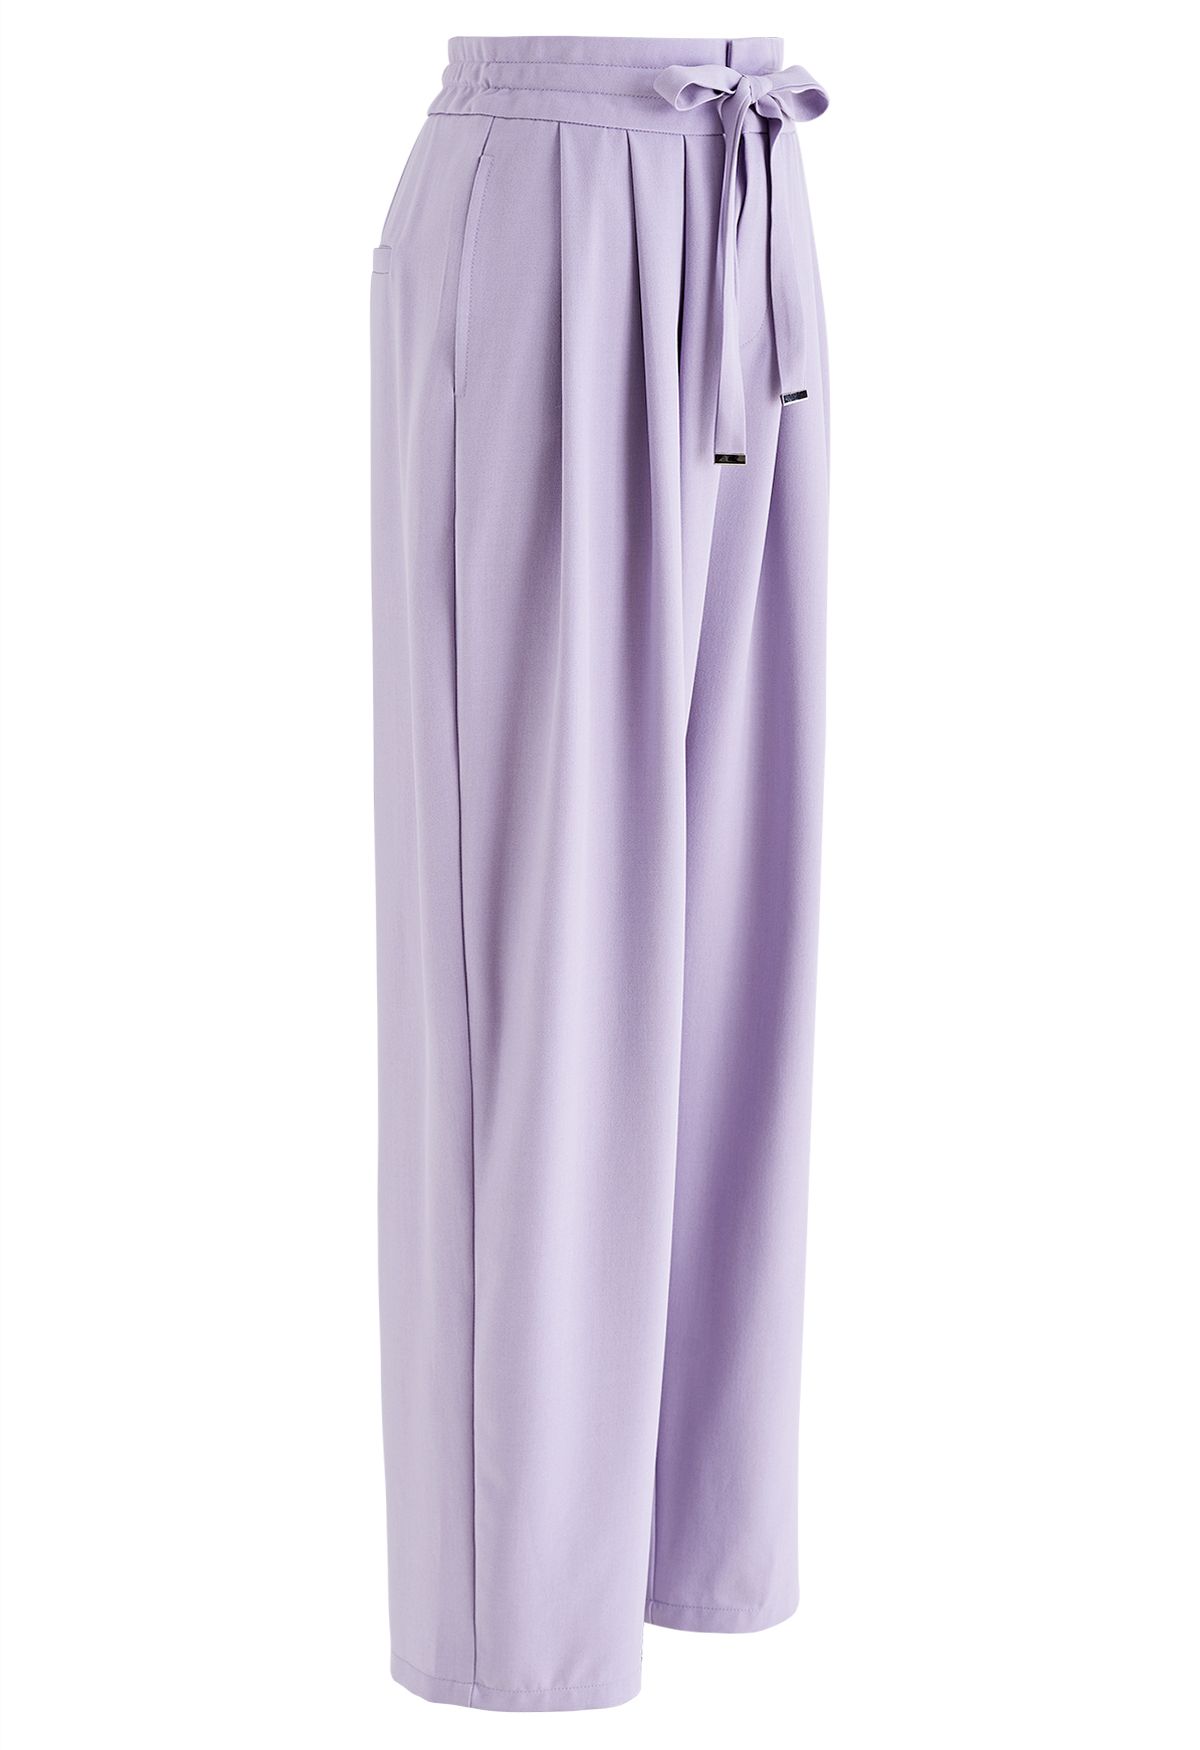 Pleated Detail Drawstring Waist Wide-Leg Pants in Lilac